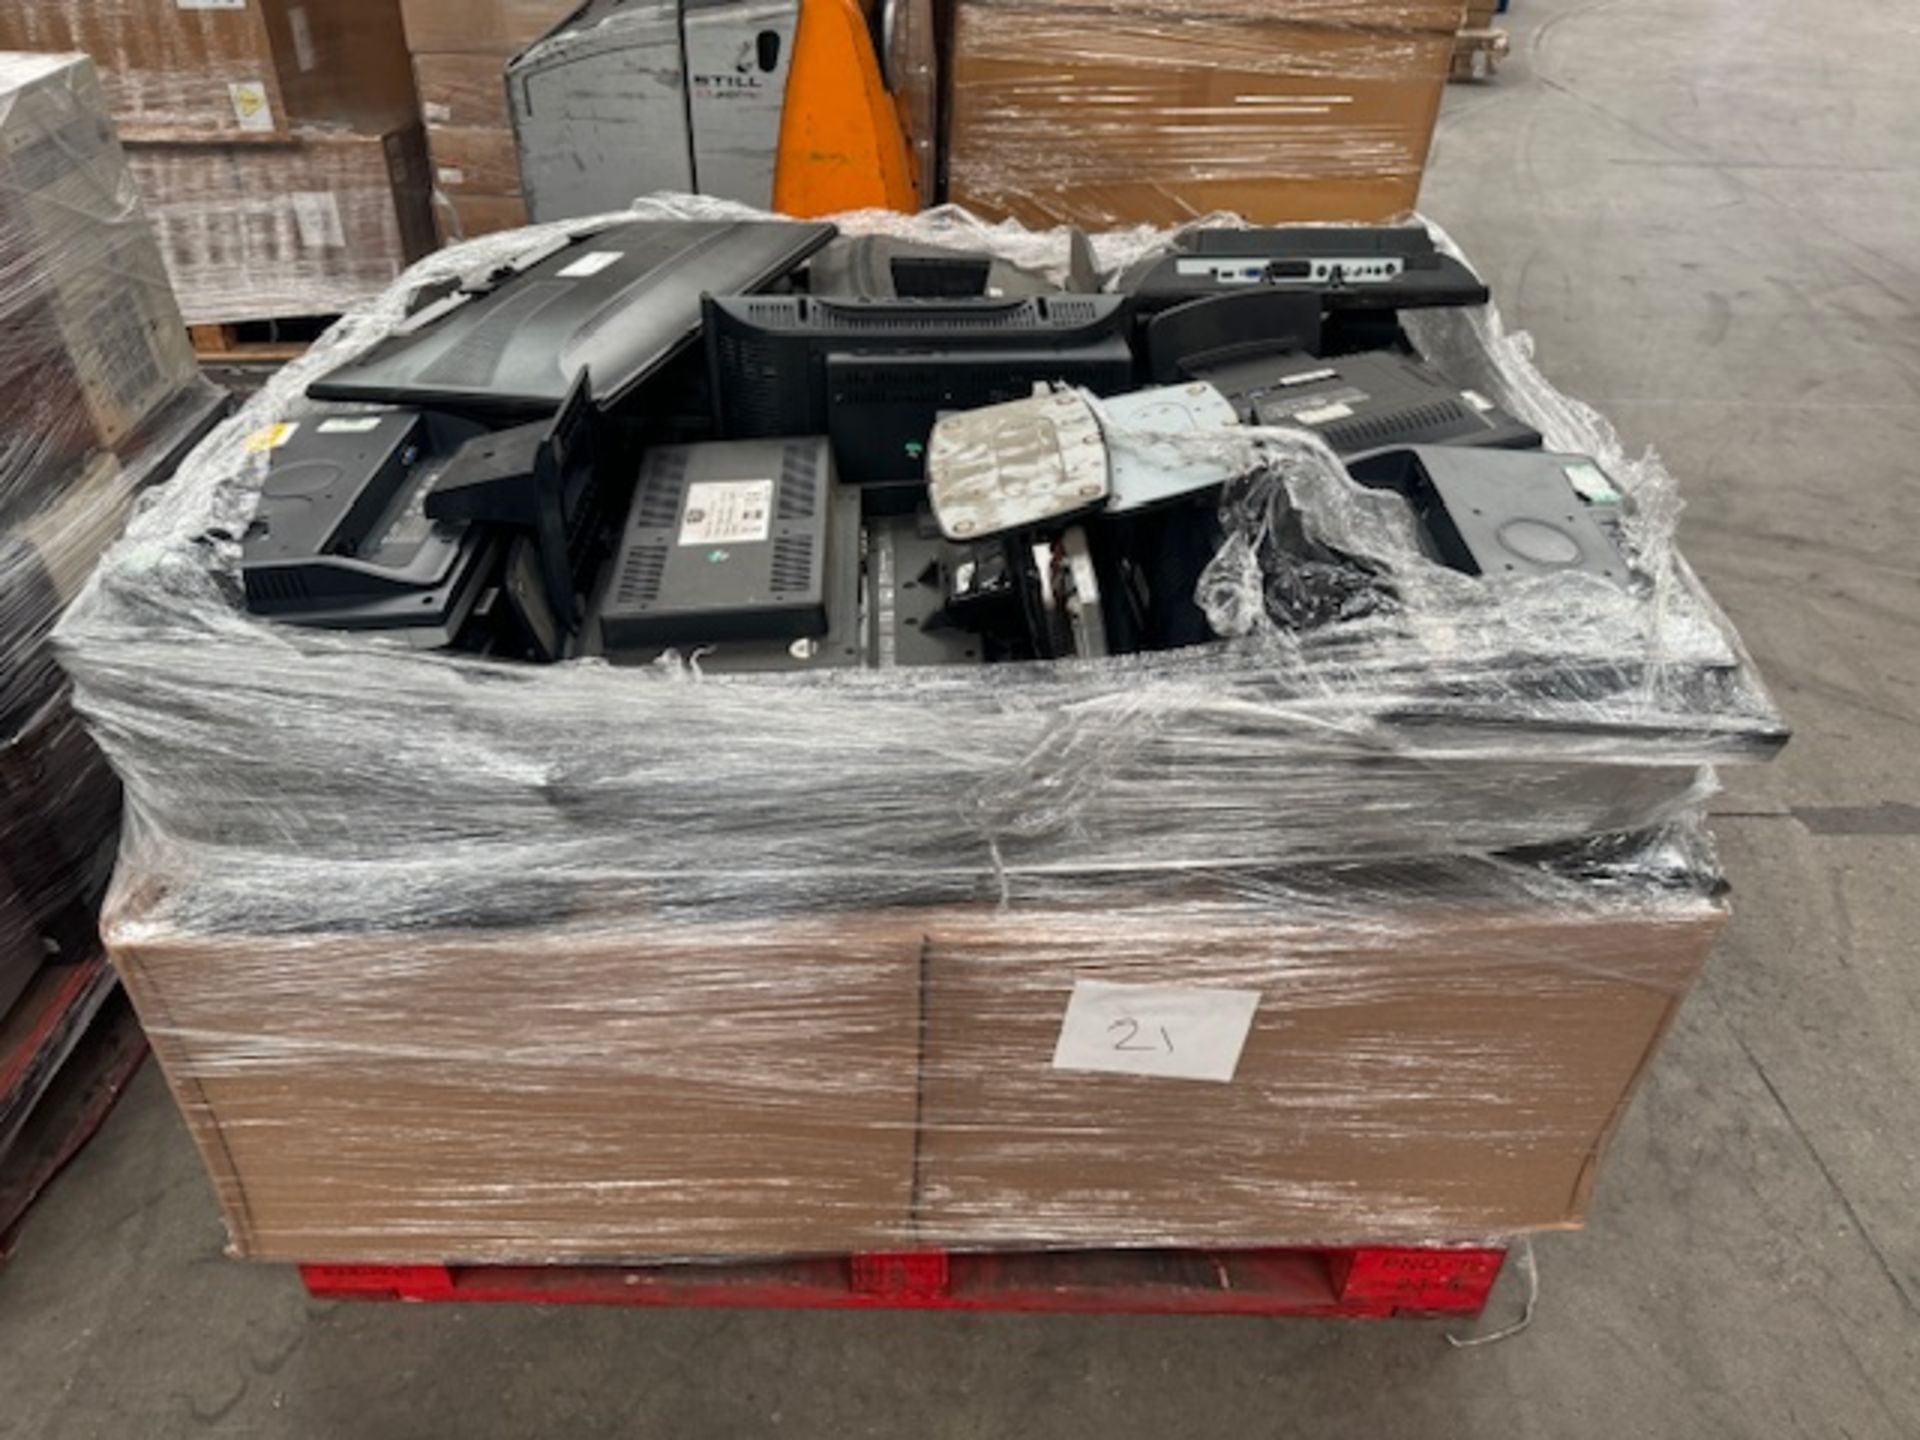 IT PALLET LOT INCLUDING A LARGE QUANTITY OF KEYBOARDS COMPUTER MONITORS ETC IN VARIOUS BRANDS